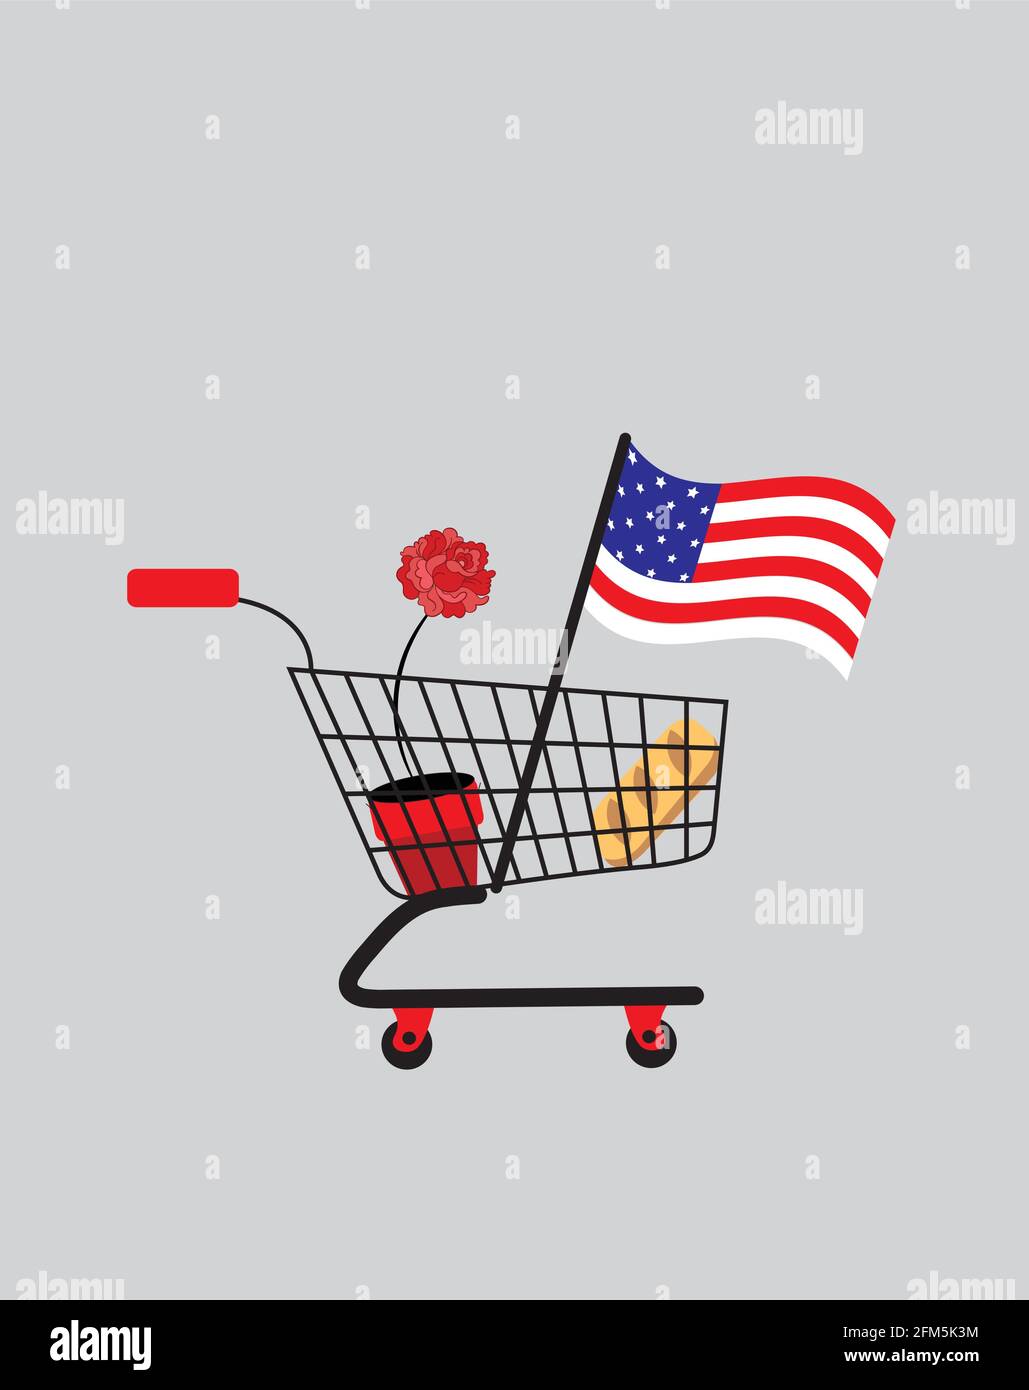 illustration of a supermarket basket with the american flag, a bread and a rose in it to symbolize idealism and poverty at the same time Stock Vector